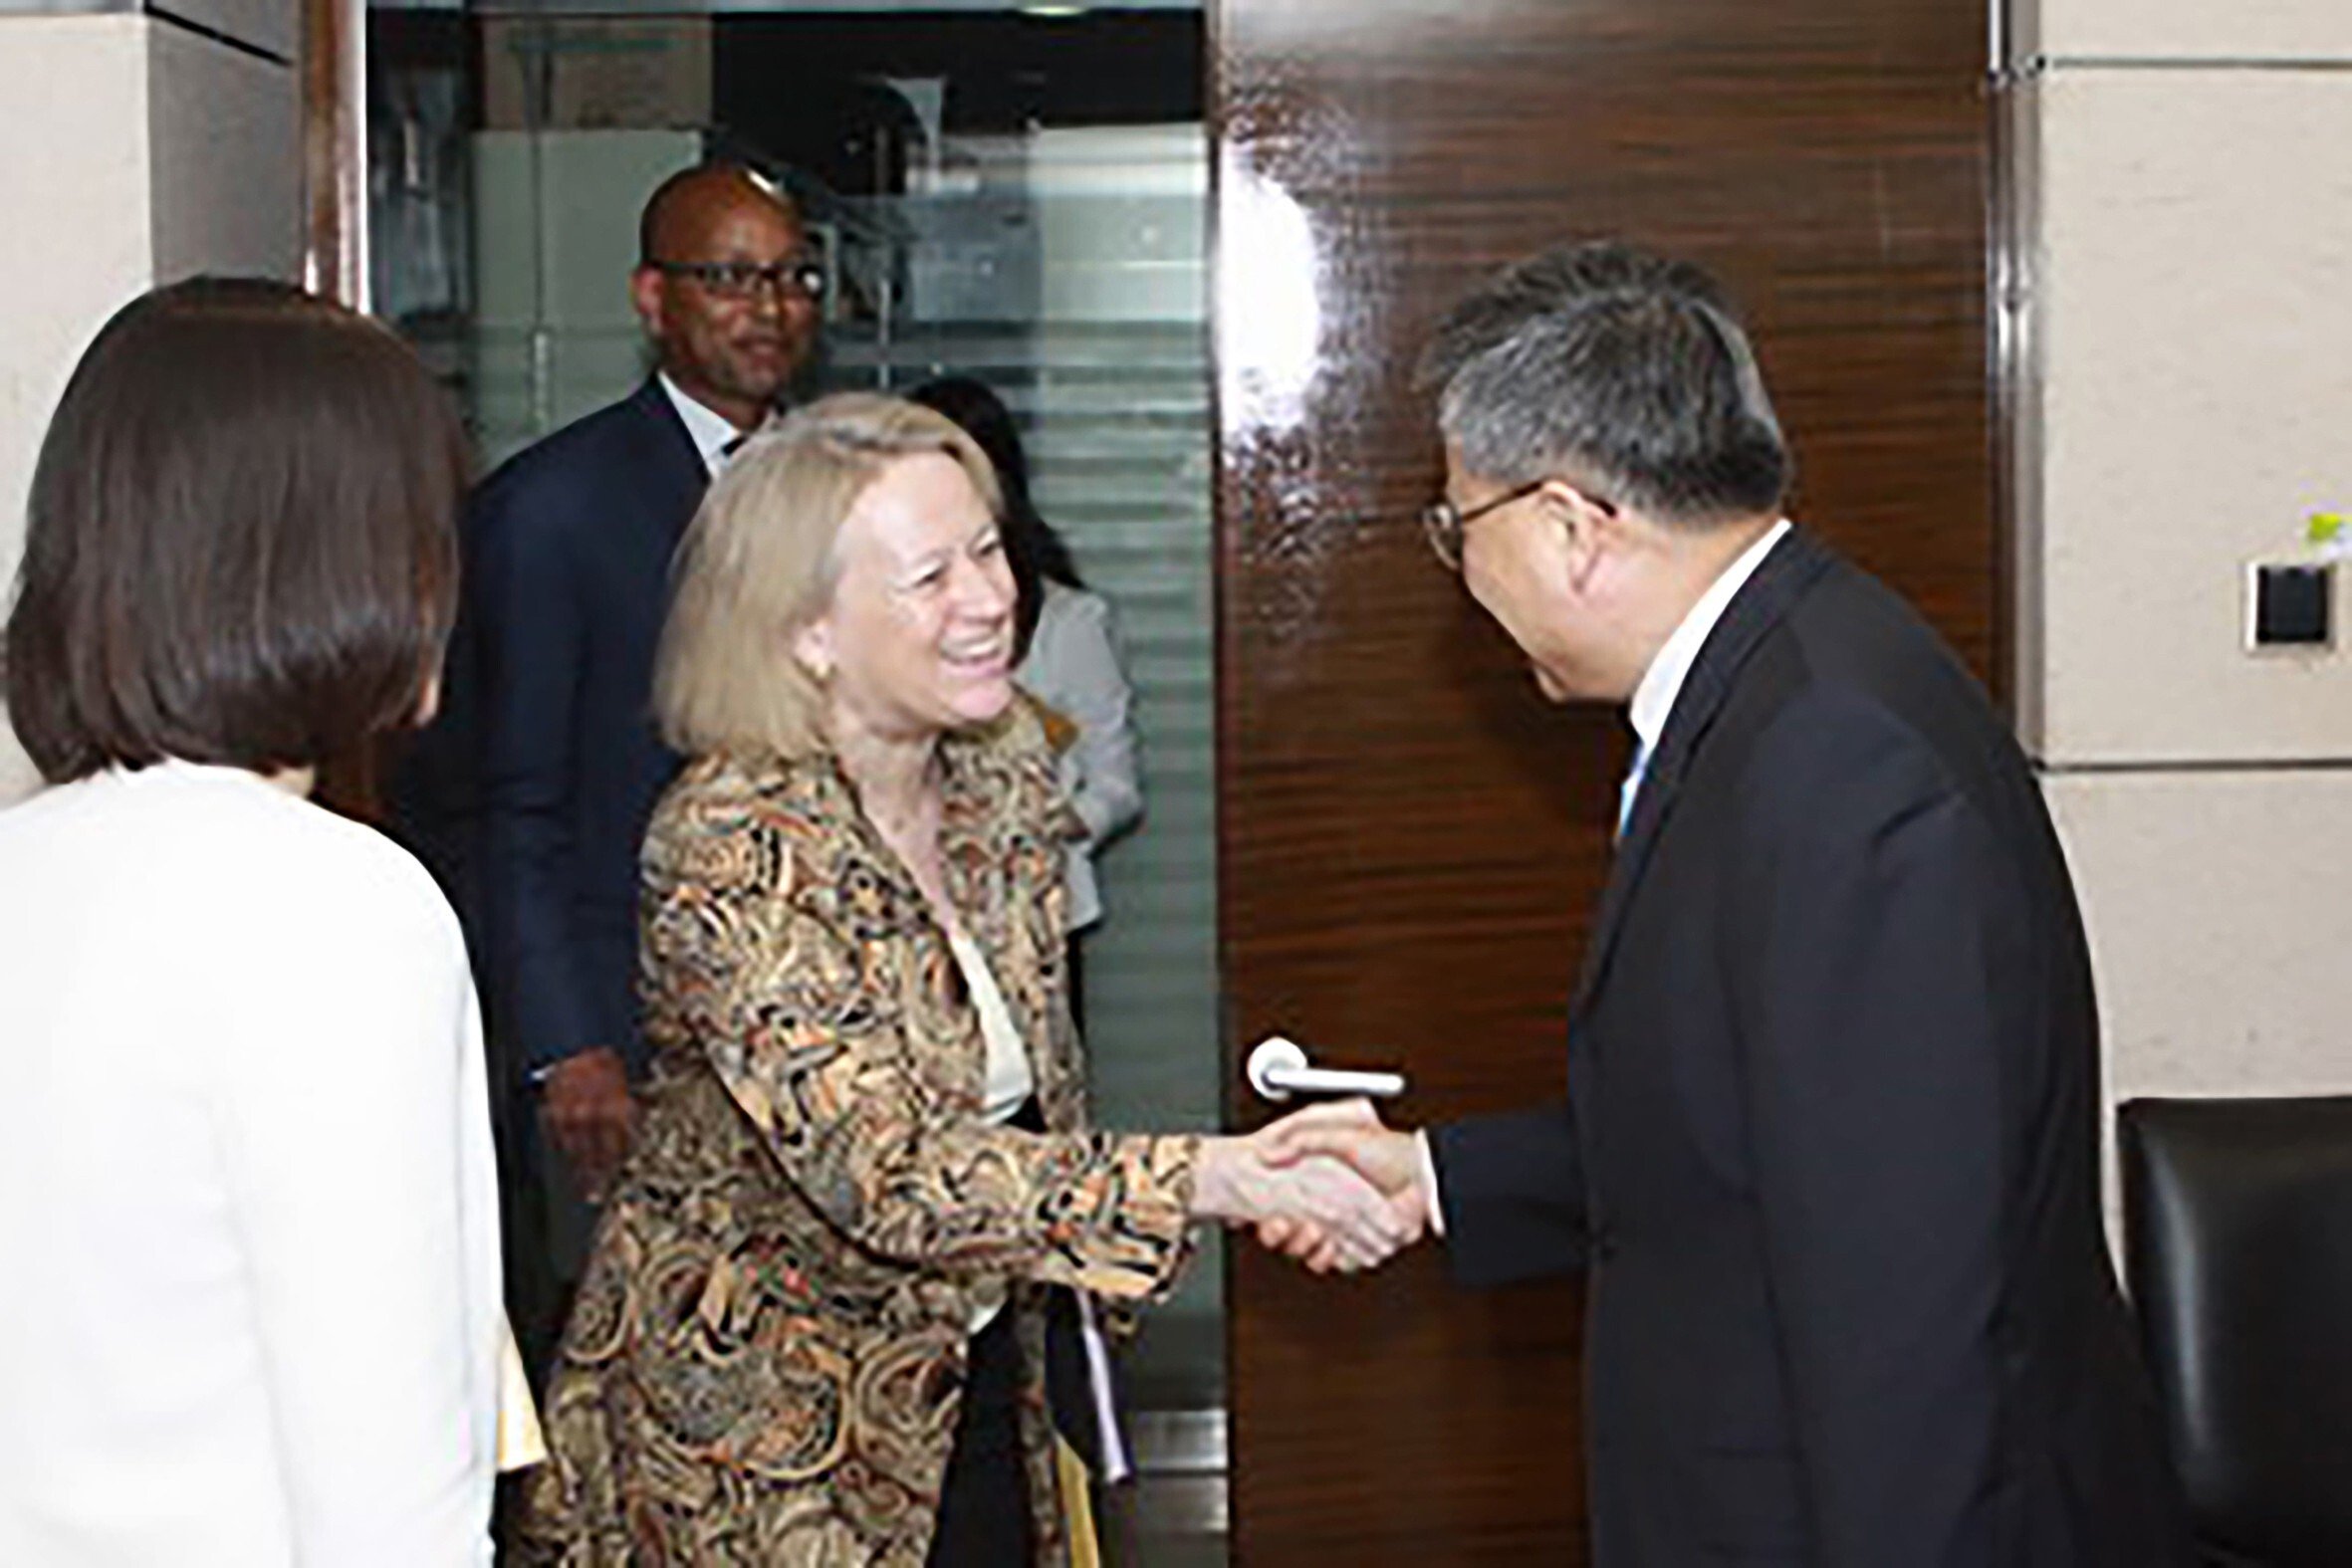 Guo Shuqing (right), then chairman of the China Securities Regulatory Commission (CSRC), greeting a delegation led by Mary Schapiro (left), then Chairman of the United States Securities and Exchange Commission (SEC) on July 2, 2012. Photo: Handout